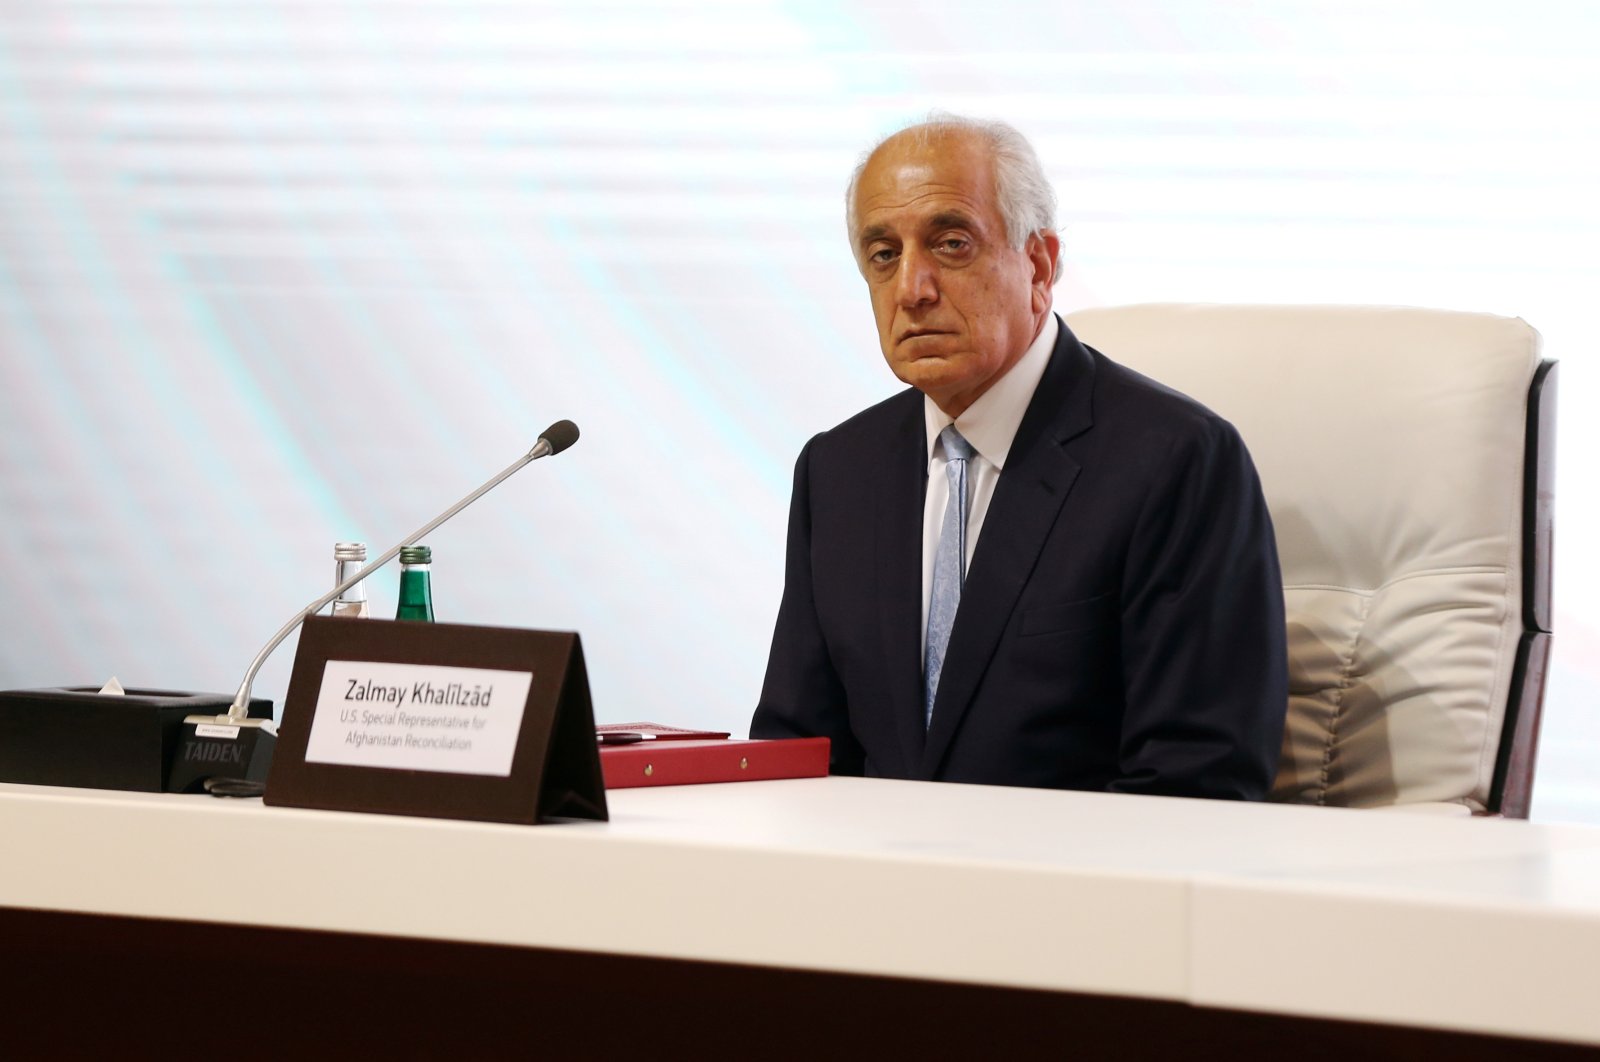 Zalmay Khalilzad, U.S. envoy for peace in Afghanistan is seen during talks between the Afghan government and Taliban insurgents in Doha, Qatar, Sept. 12, 2020. (REUTERS Photo)